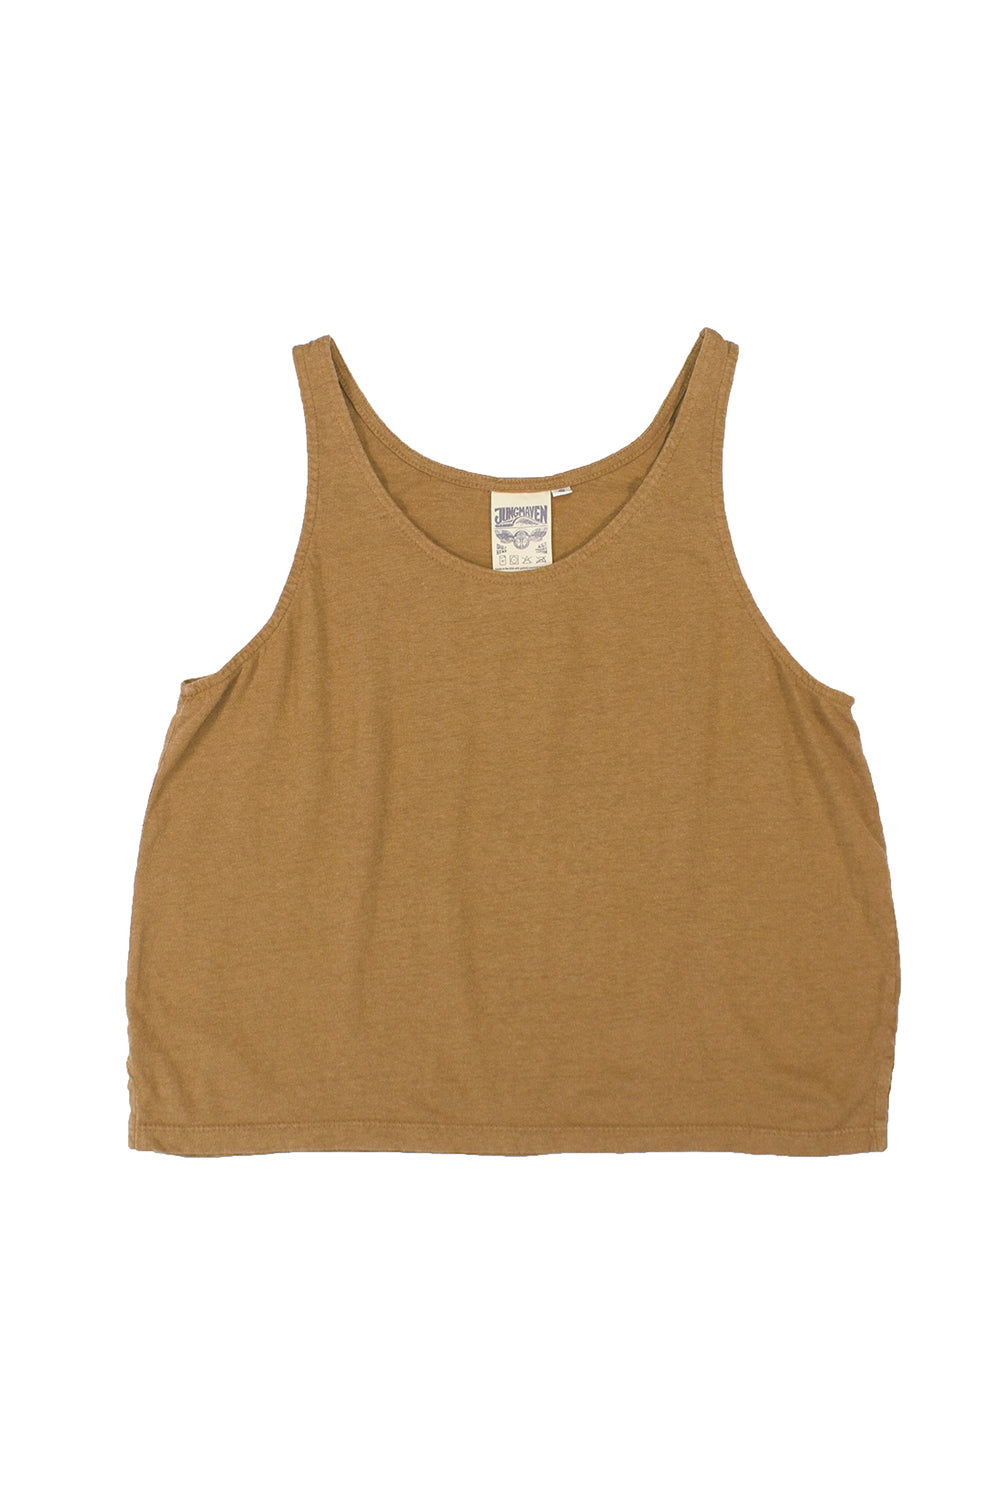 Cropped Tank | Jungmaven Hemp Clothing & Accessories / Color: Coyote